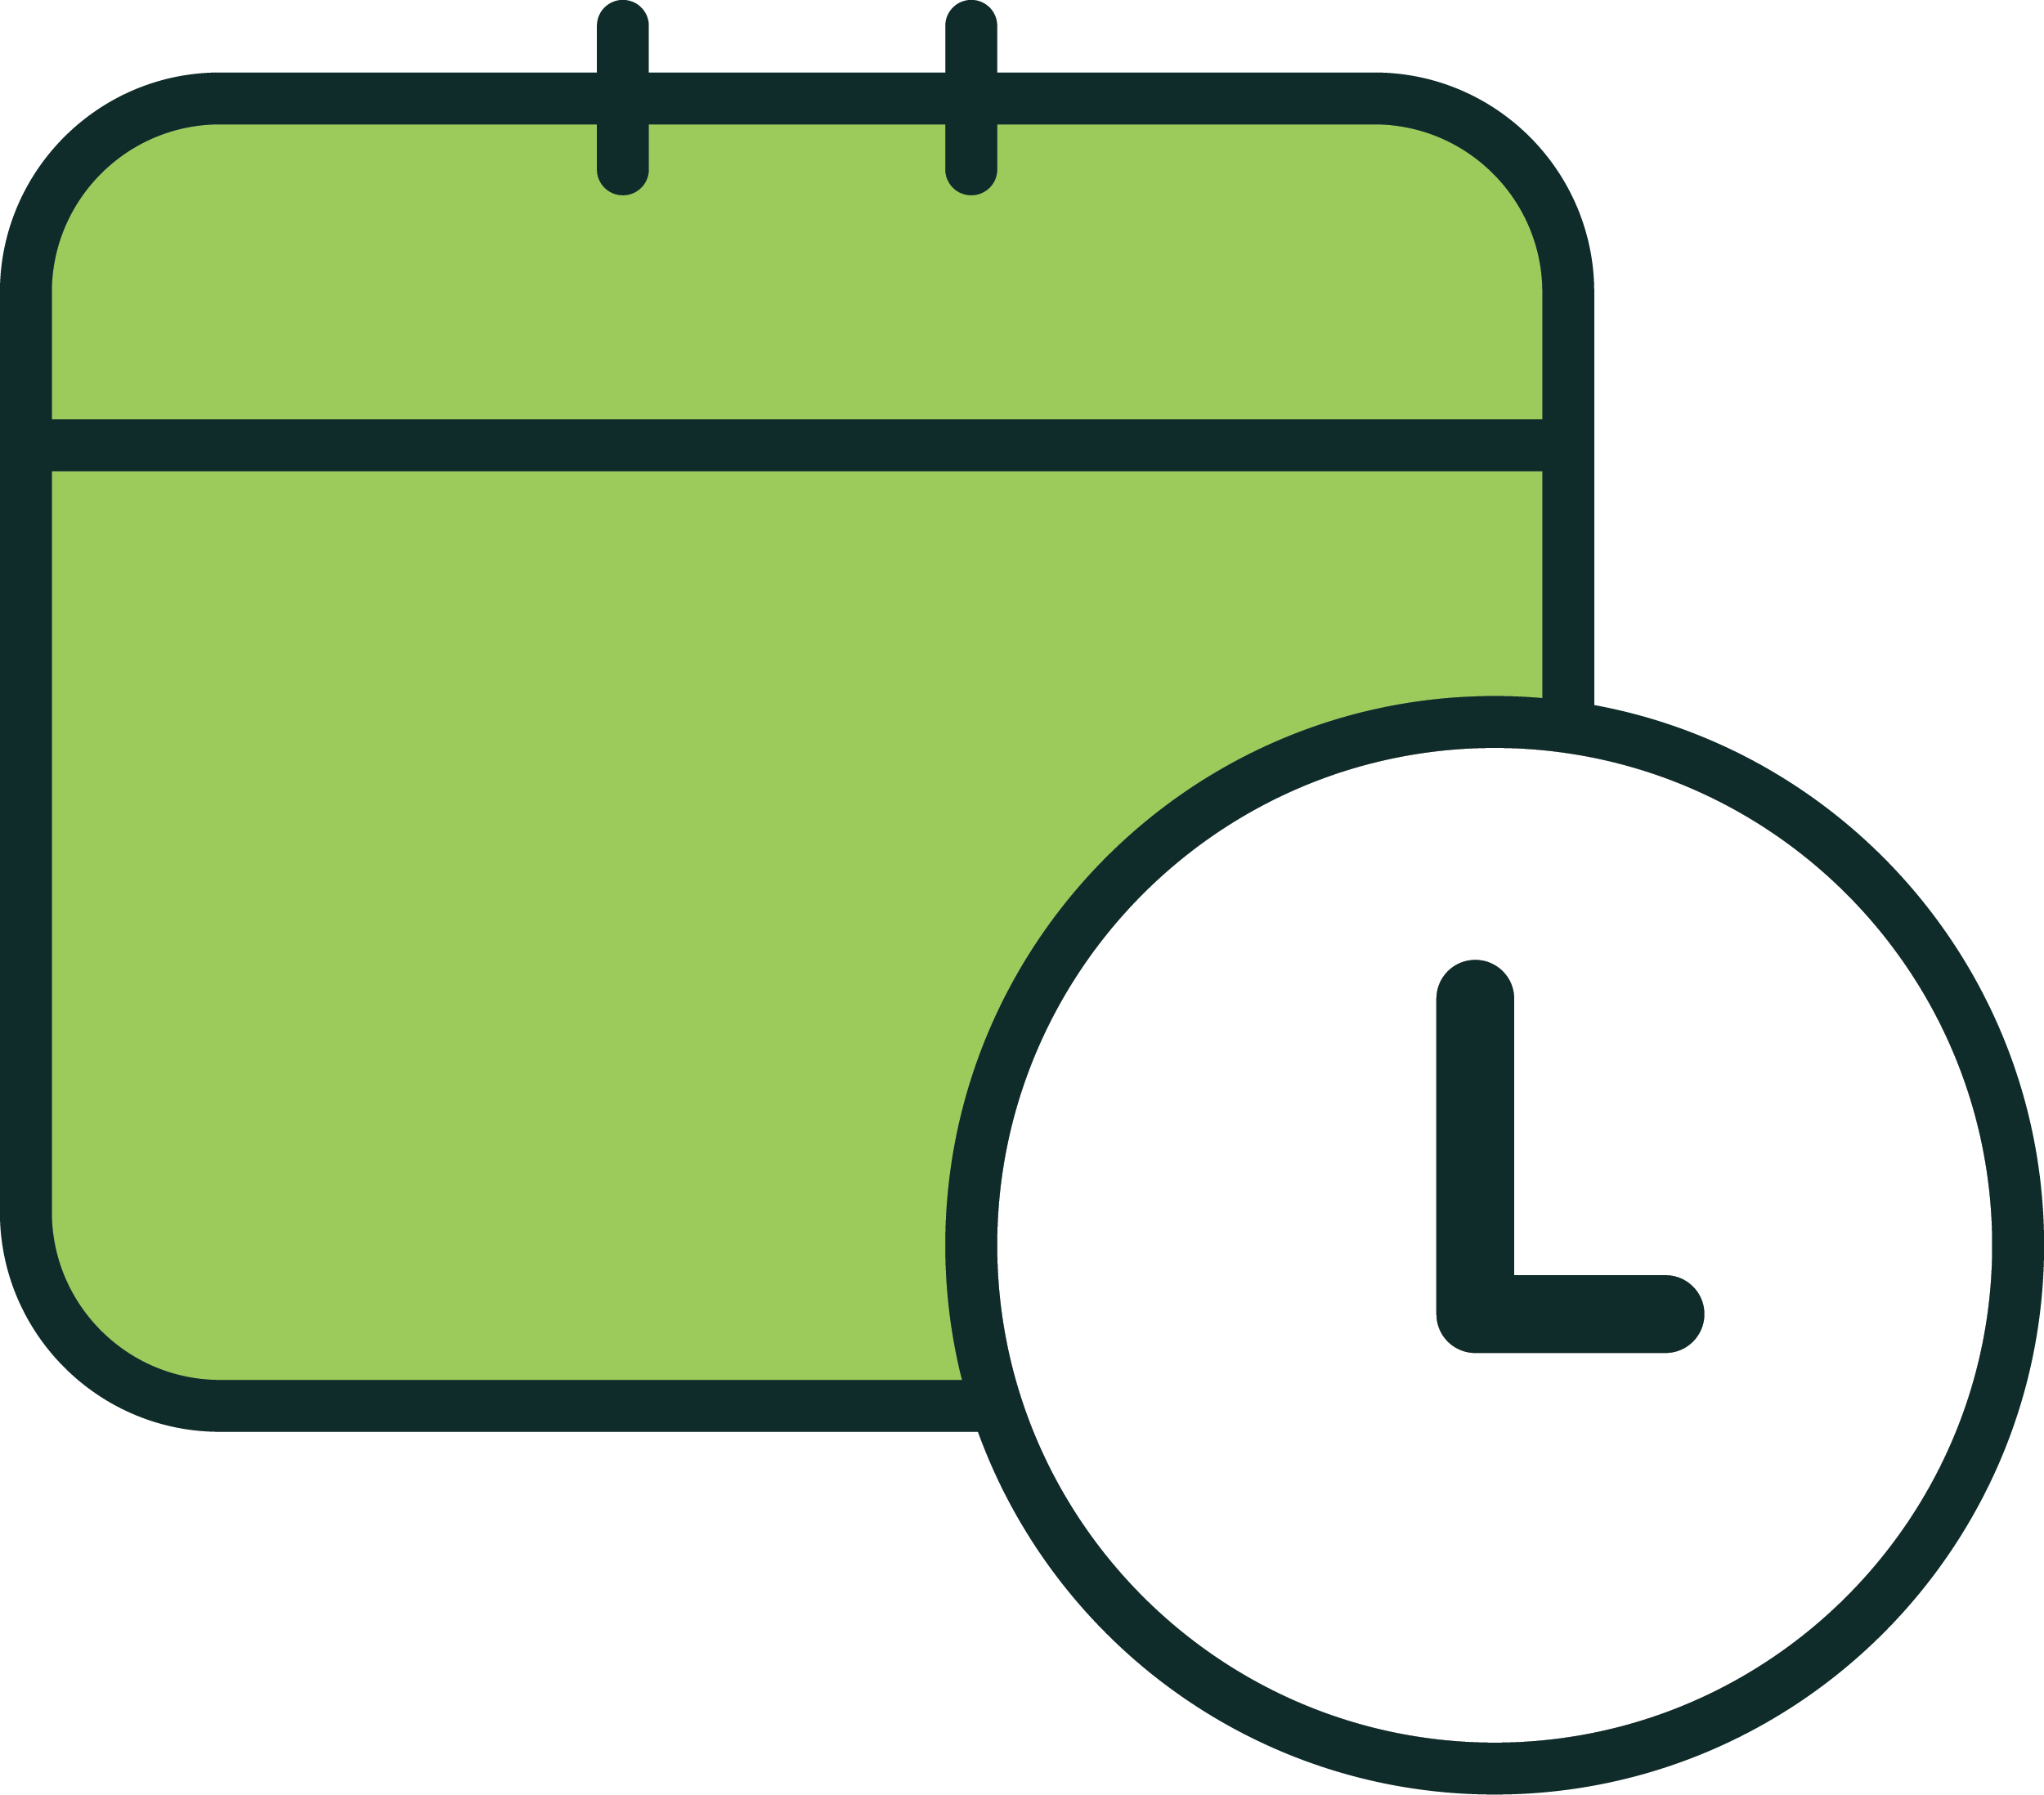 a clock and a folder icon.